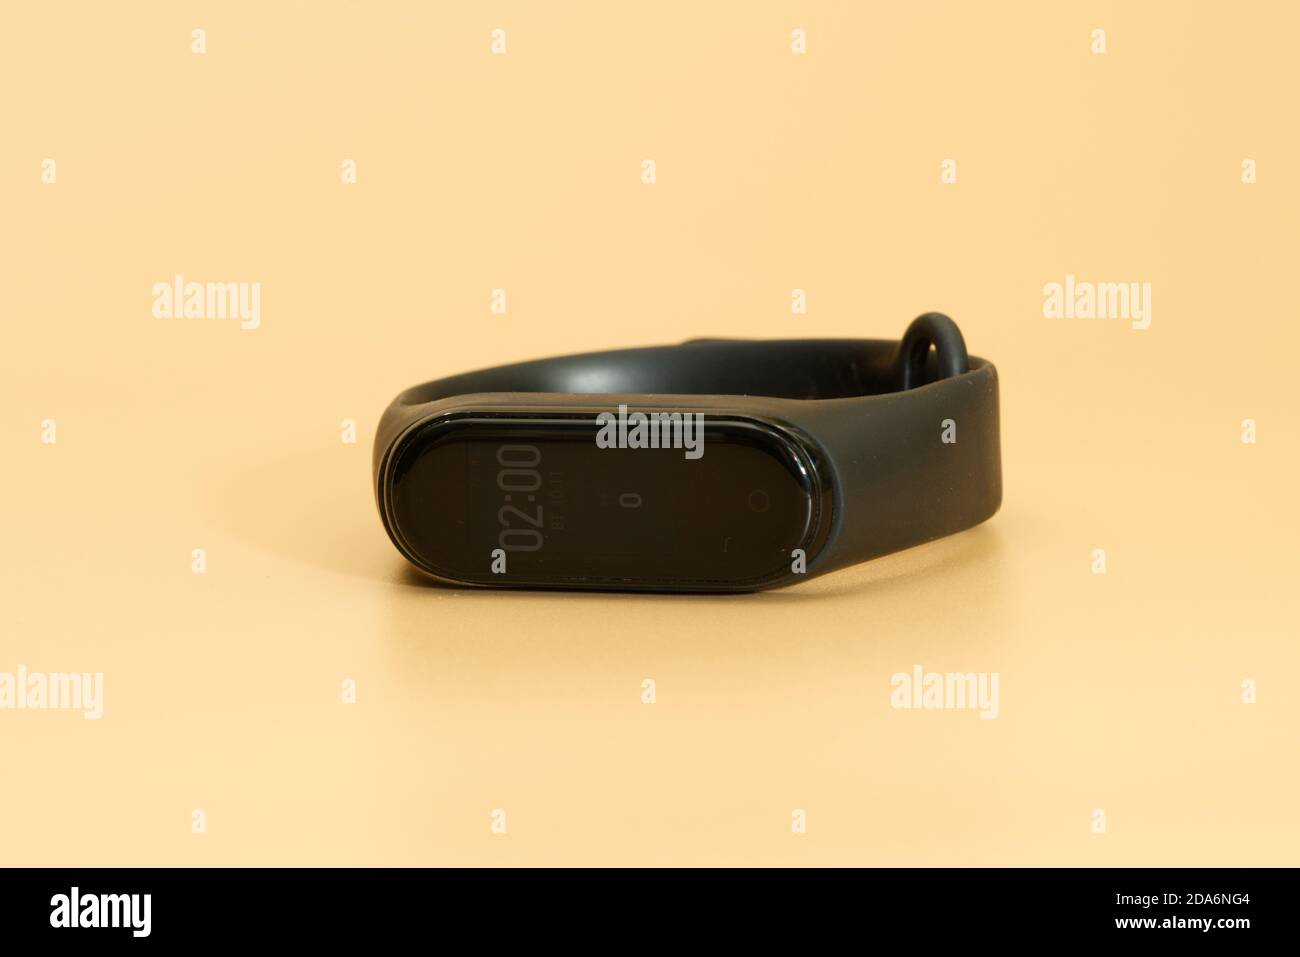 Xiaomi mi band 4 laid on peach colored background Stock Photo